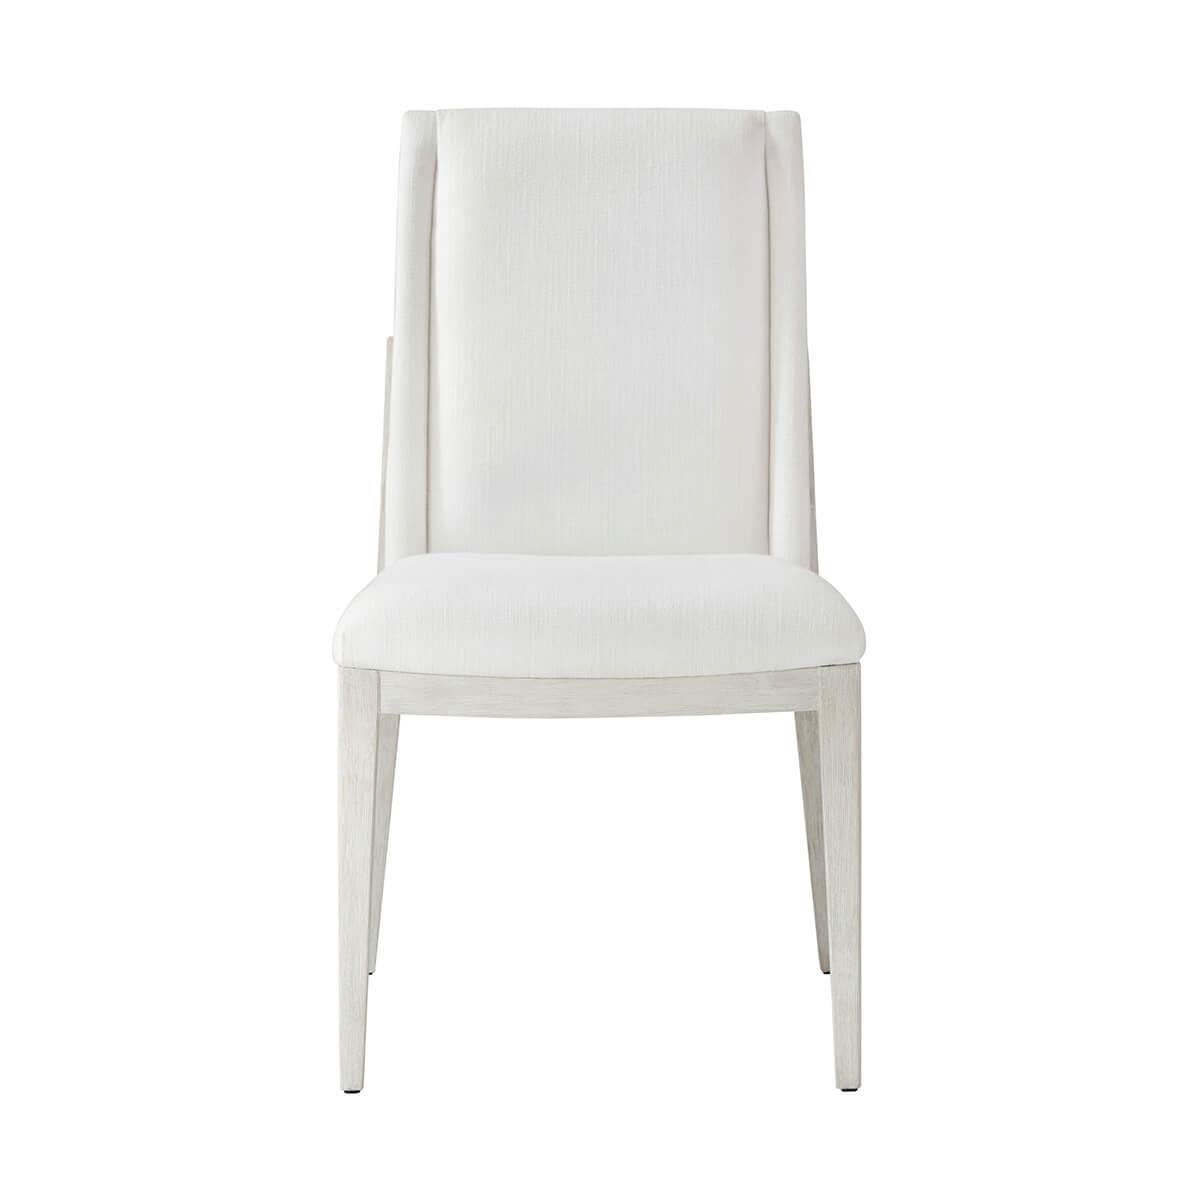 Vietnamese Coastal Breeze Upholstered Side Chair For Sale